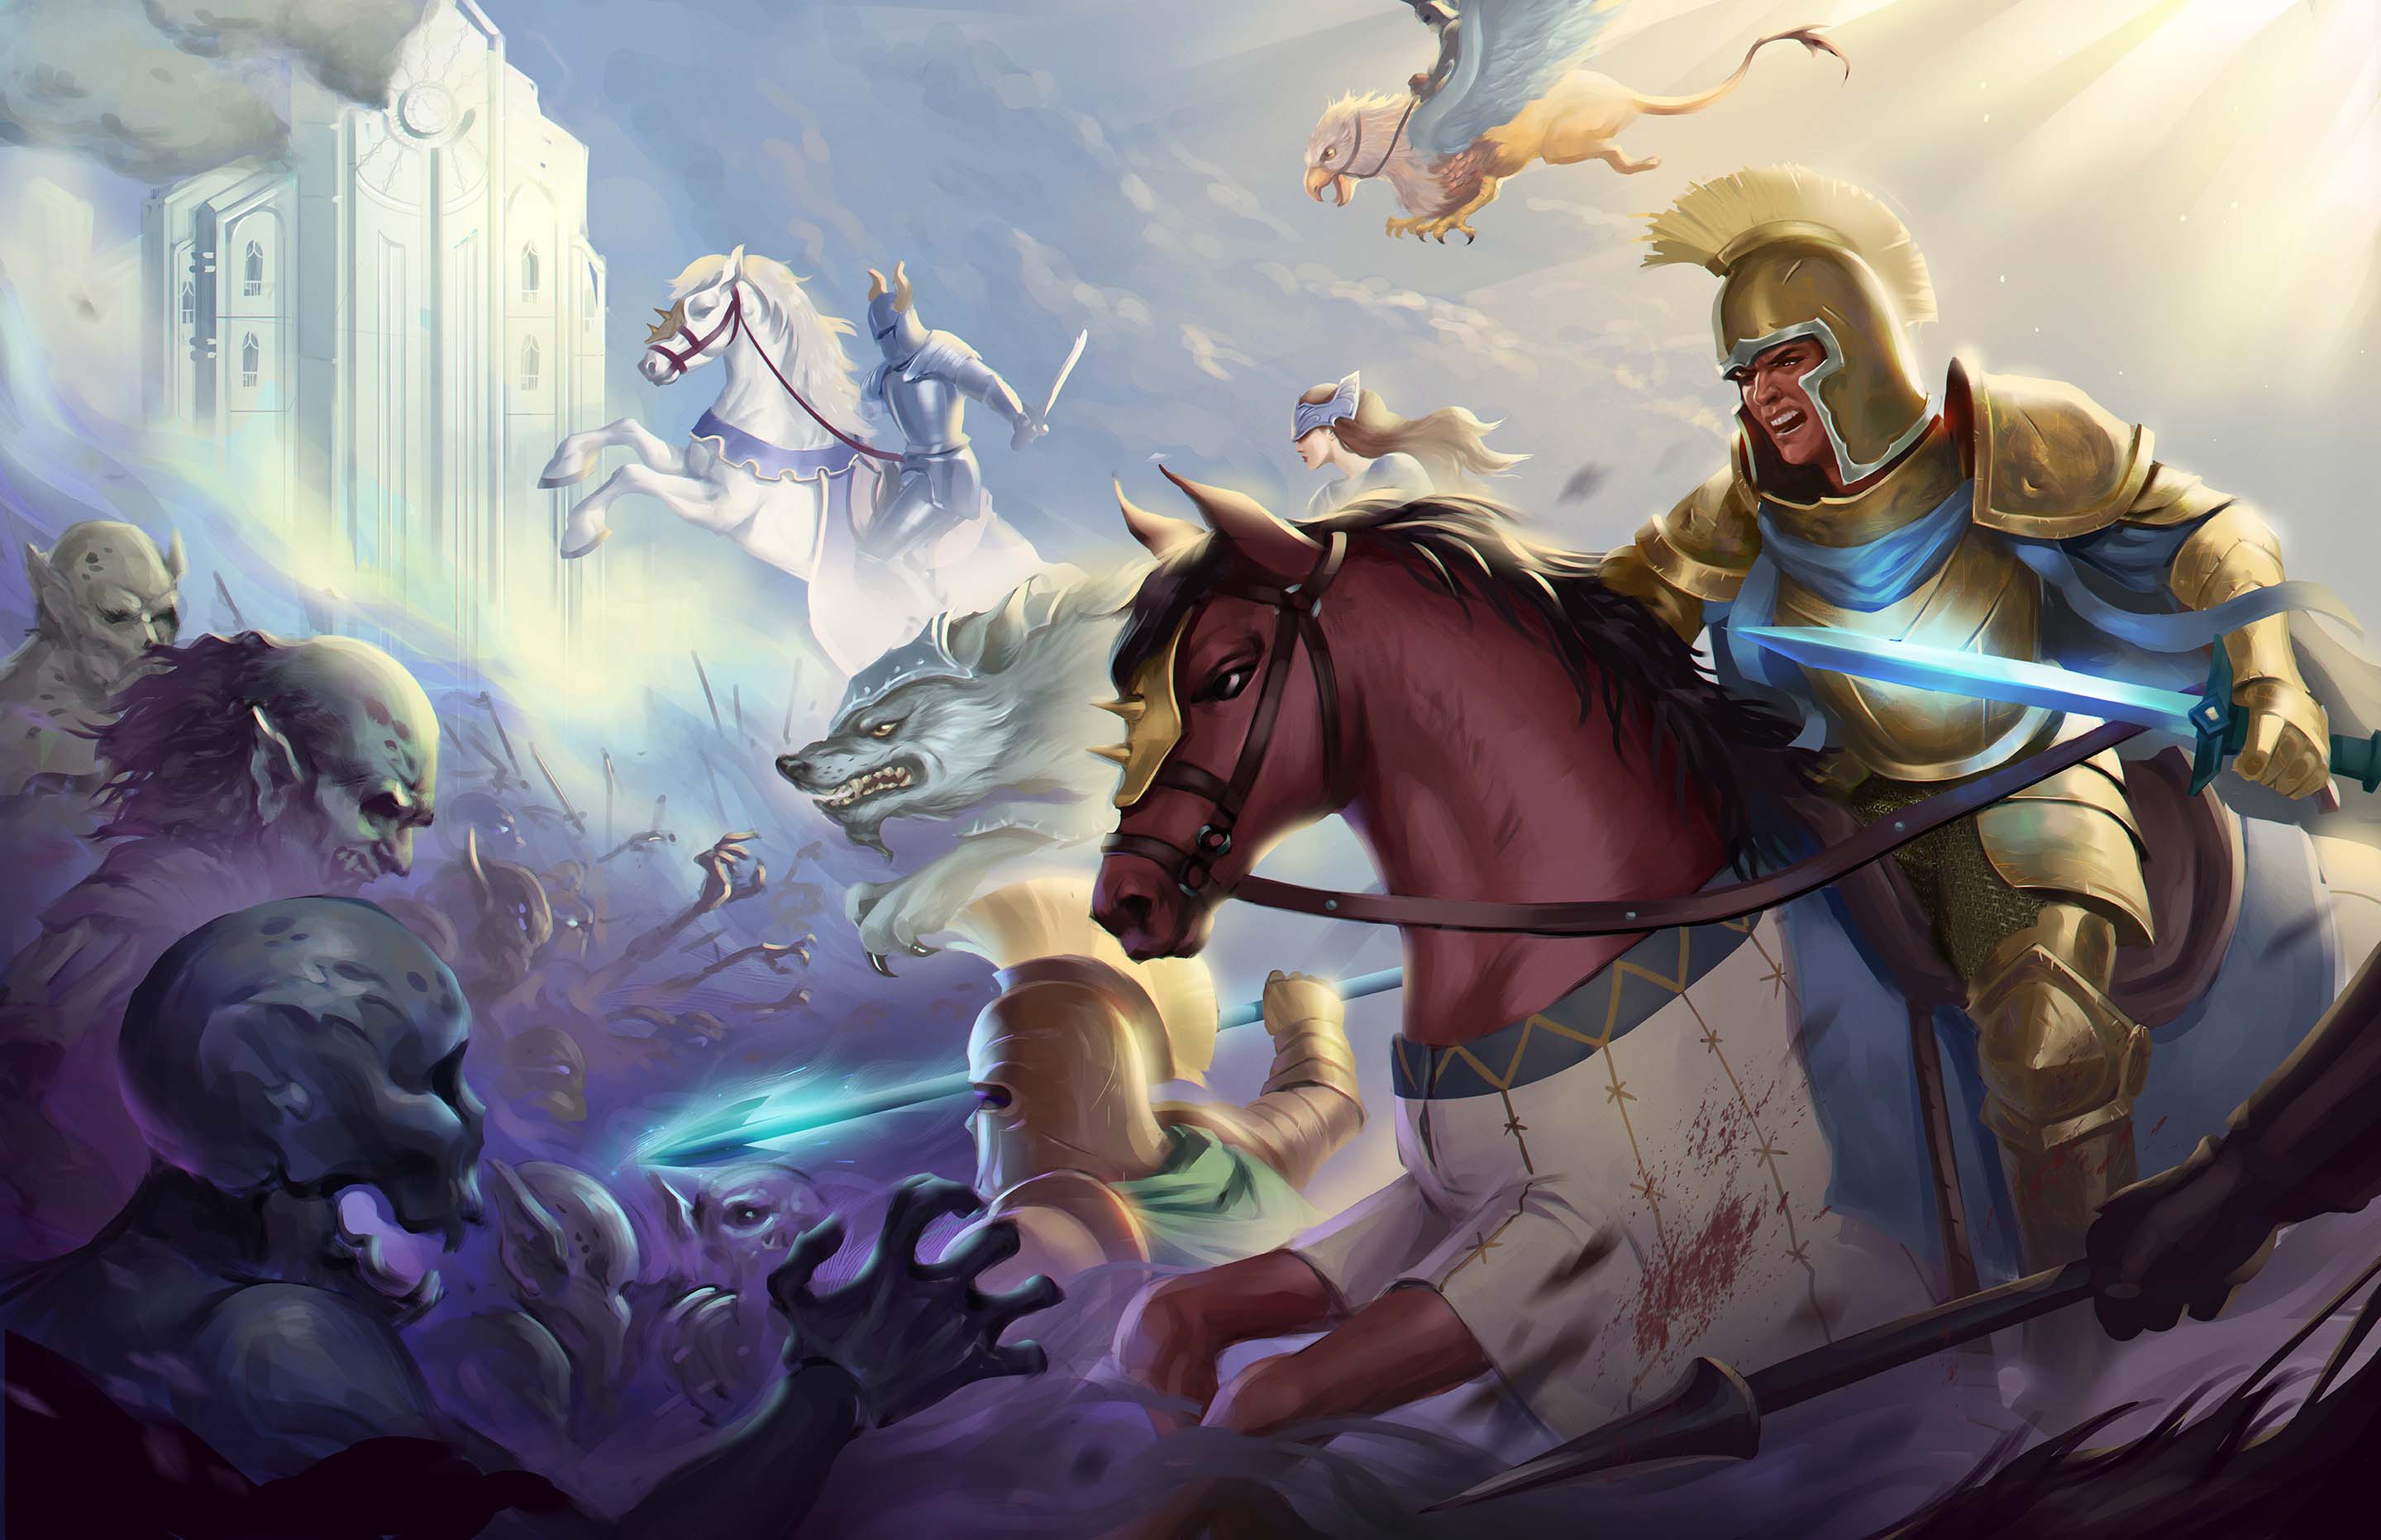 Armored knights on horseback face down a hoard of undead